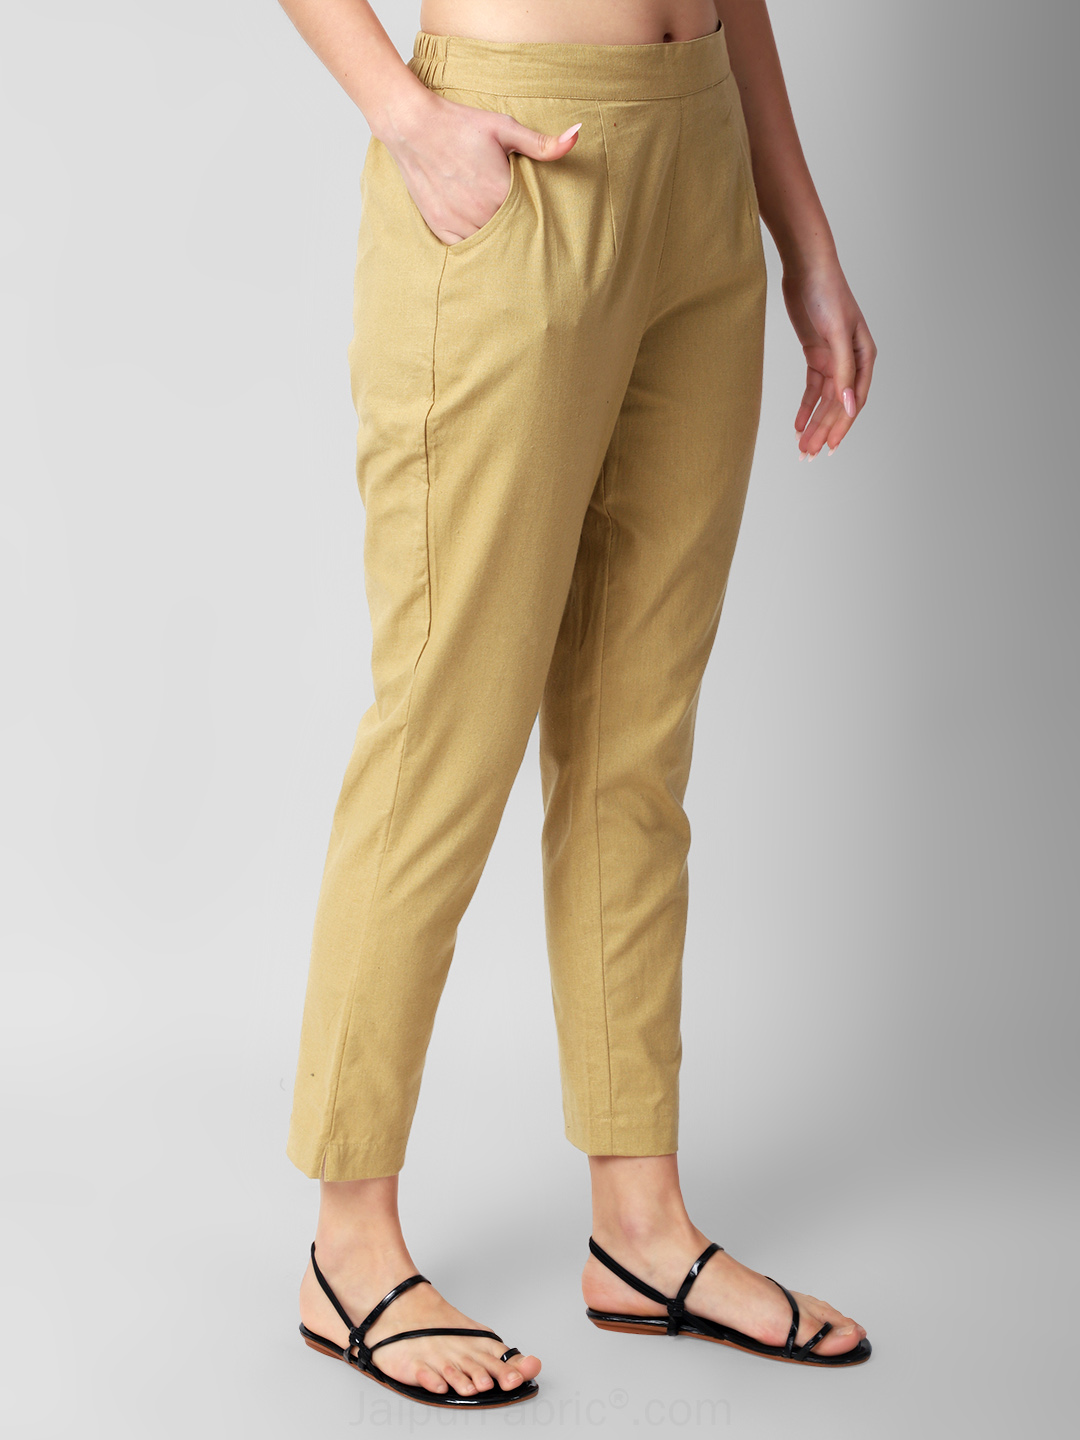 Sandy Beige Women Cotton Pants casual and semi formal daily trousers